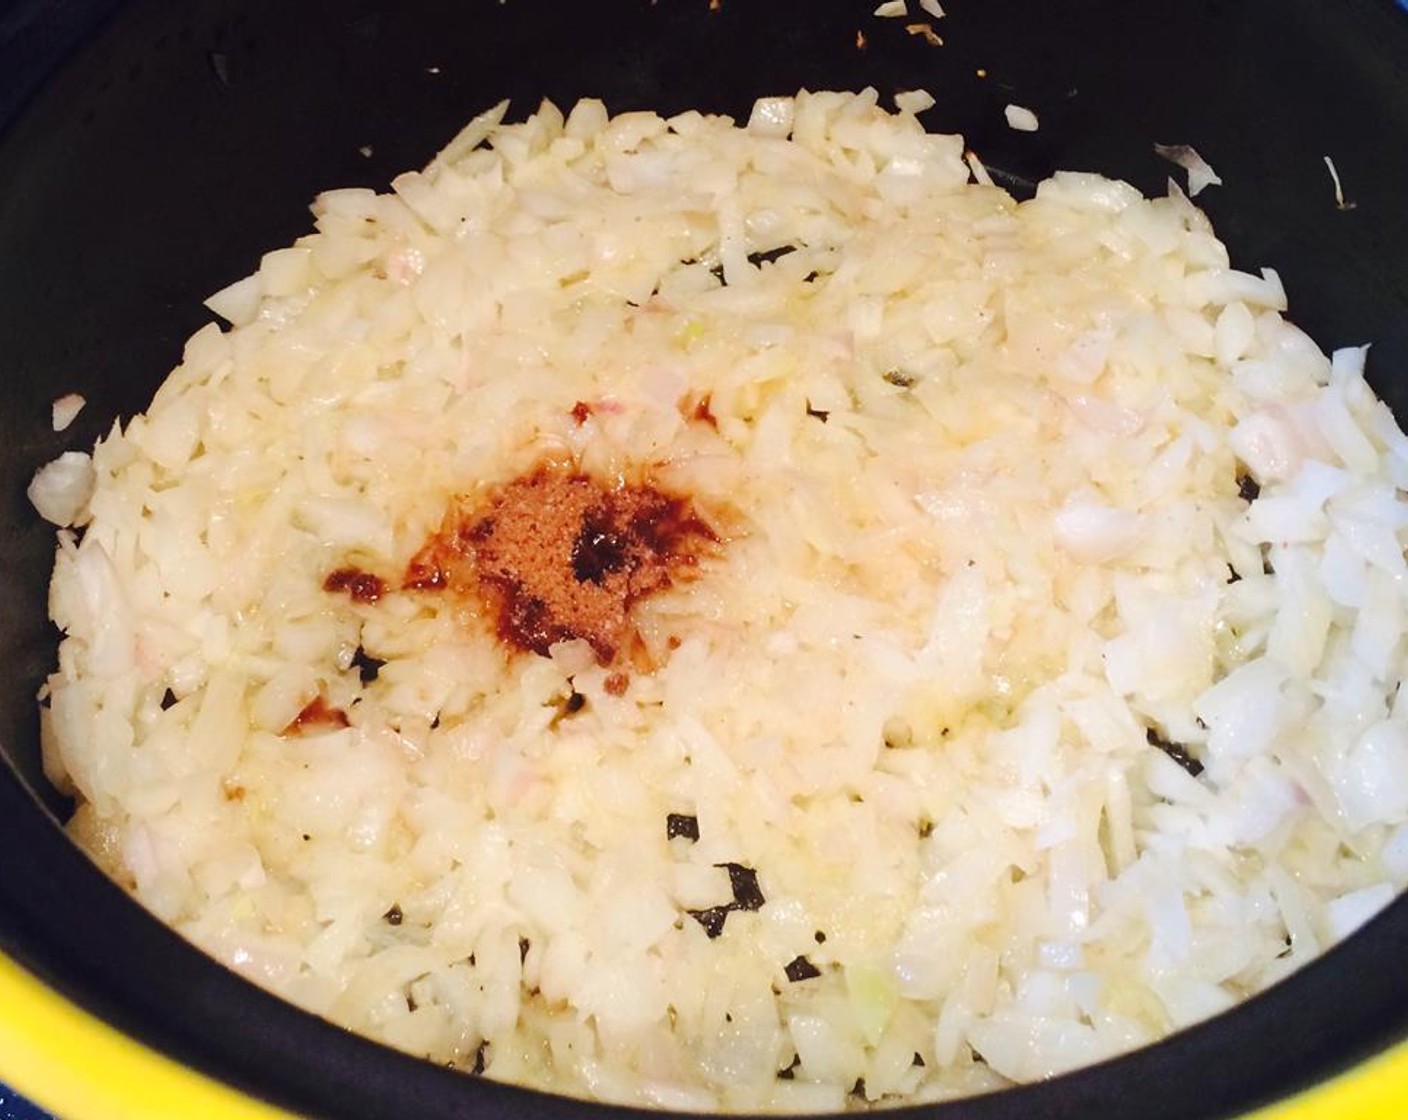 step 6 In a large pot, melt the Butter (2 Tbsp) and saute the chopped onion and celery with some Salt (1/4 tsp) and Brown Sugar (1 tsp). This will help caramelize the onion, about 4 minutes.